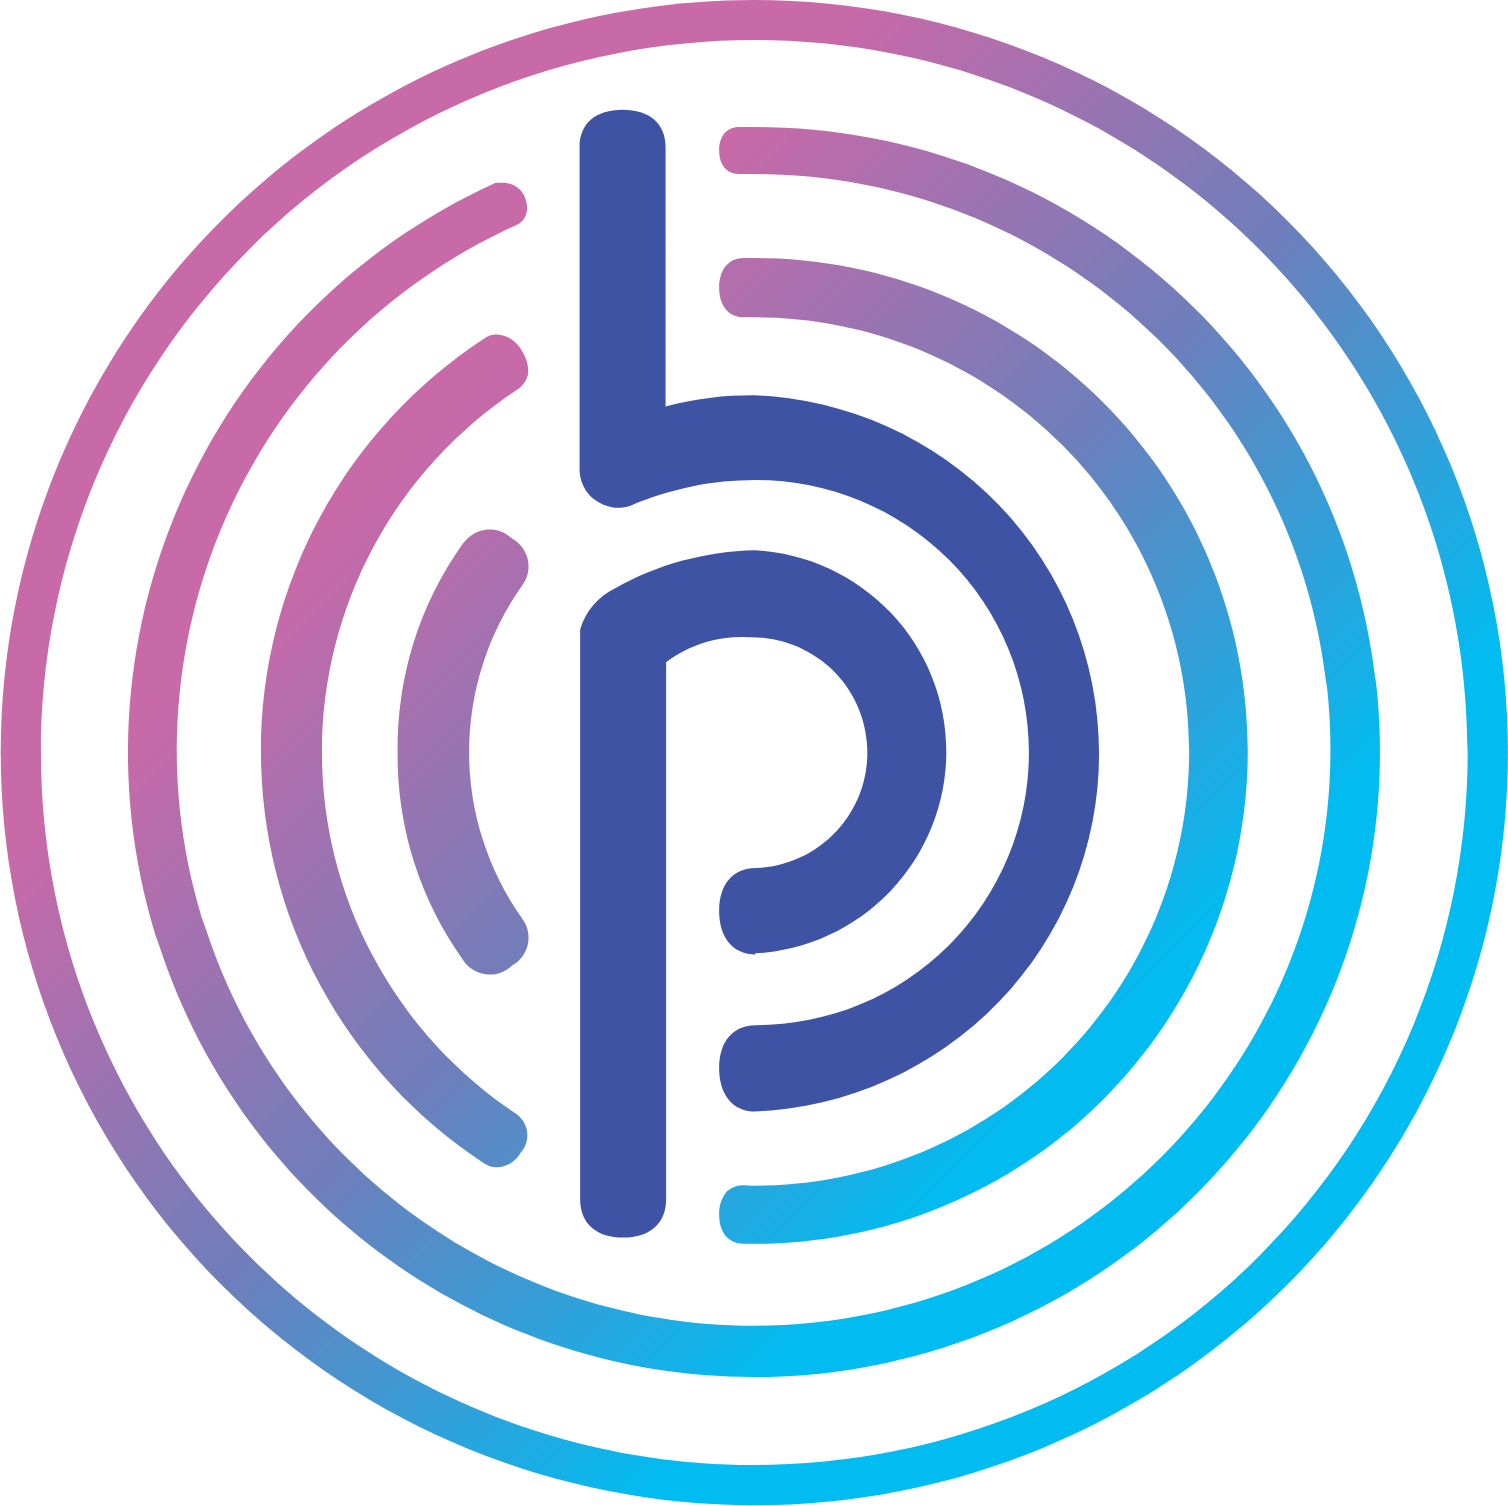 Pitney Bowes logo in transparent PNG and vectorized SVG formats